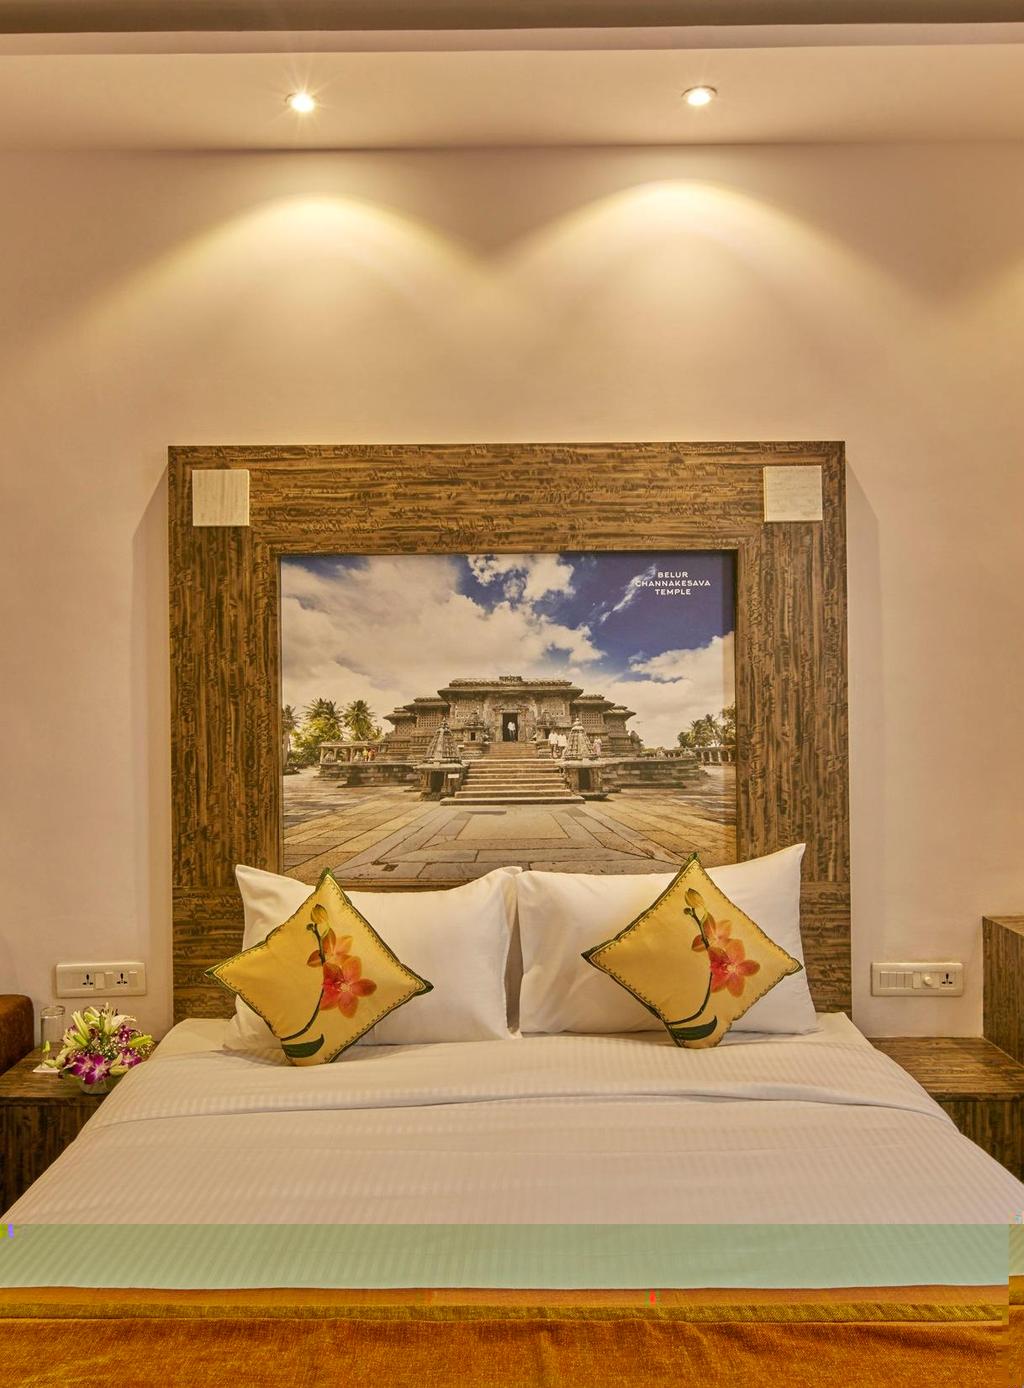 Regenta Inn Bangalore Regenta Inn is the latest brand to be part of the following offering budget friendly